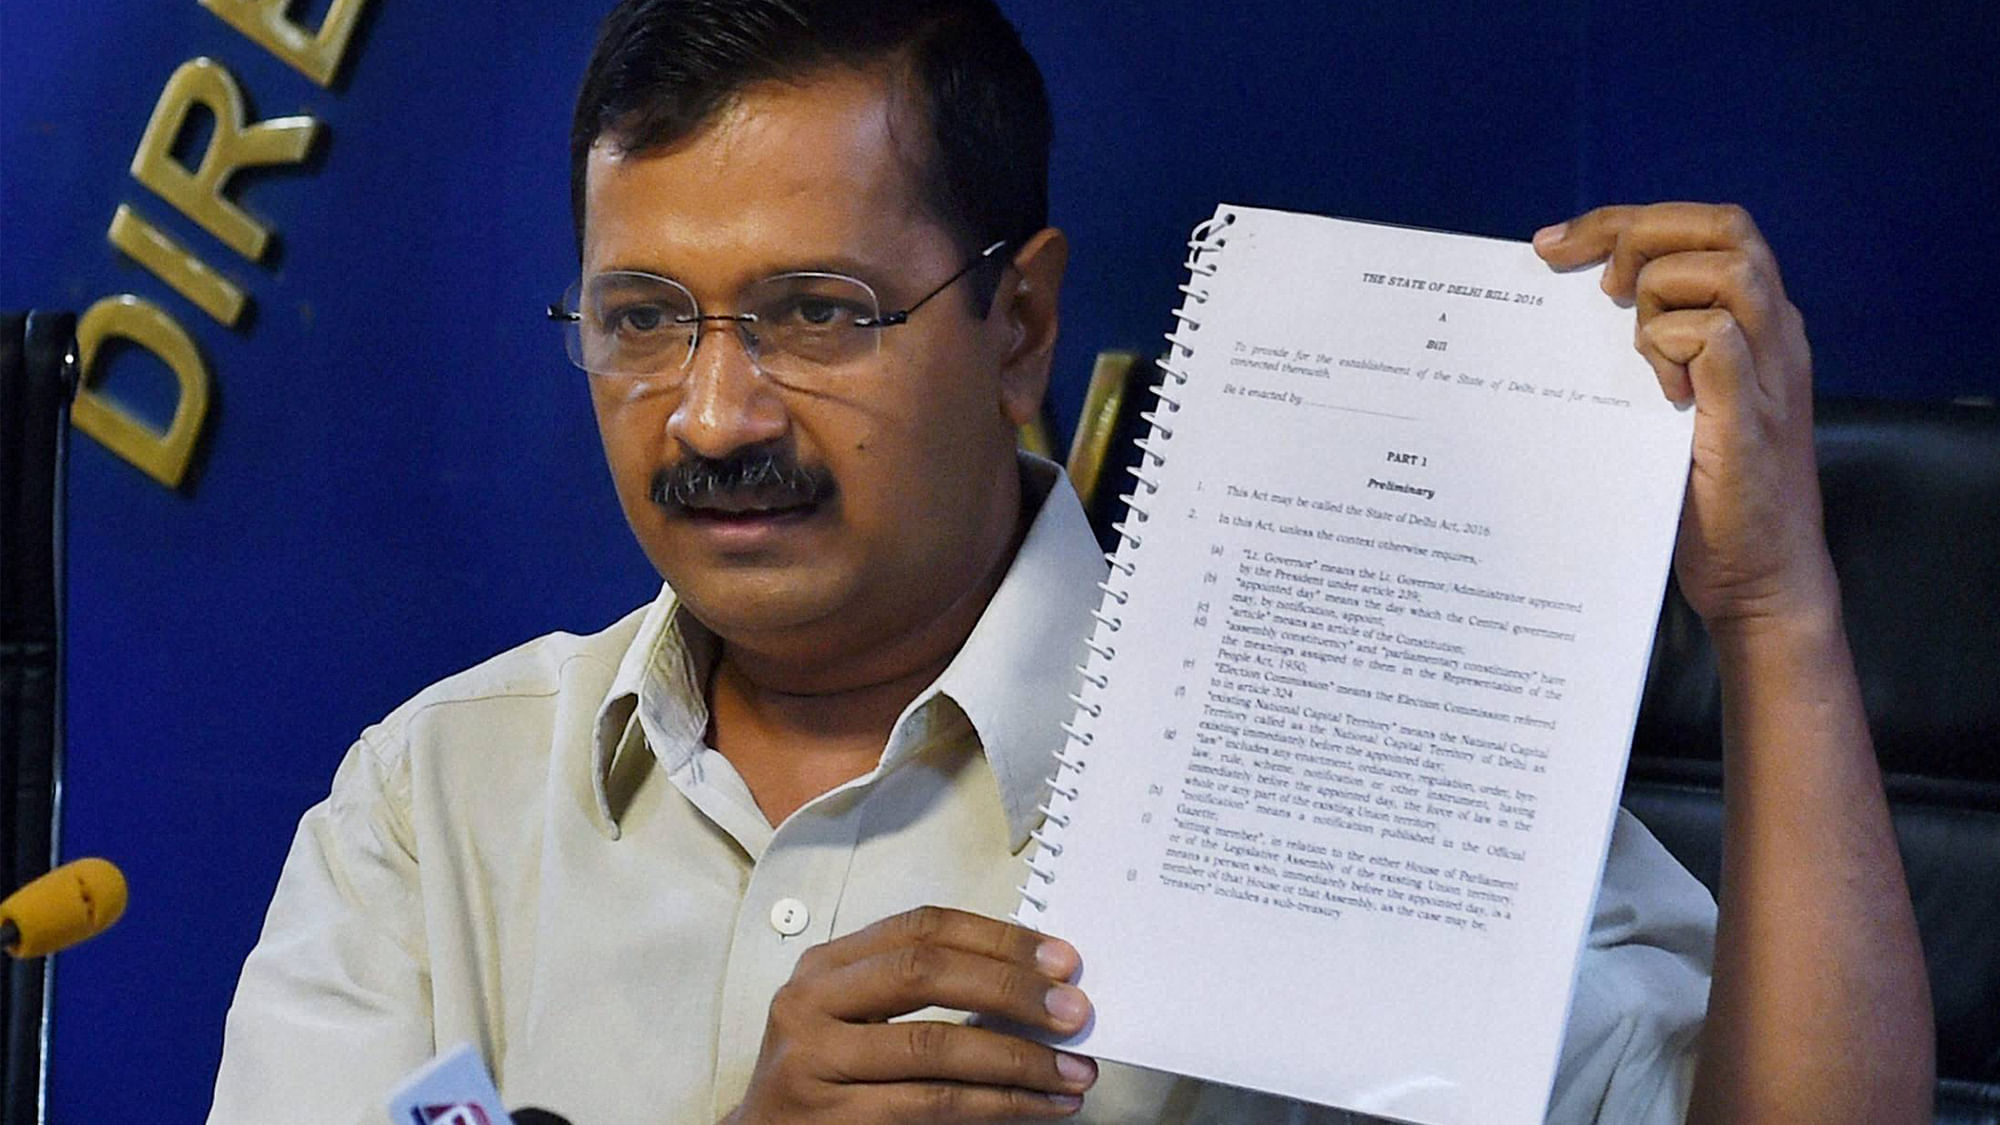 Delhi Chief Minister Arvind Kejriwal showing a copy of the draft bill seeking full statehood for Delhi, at a press conference at Delhi Secretariat on Wednesday. (Photo: PTI)